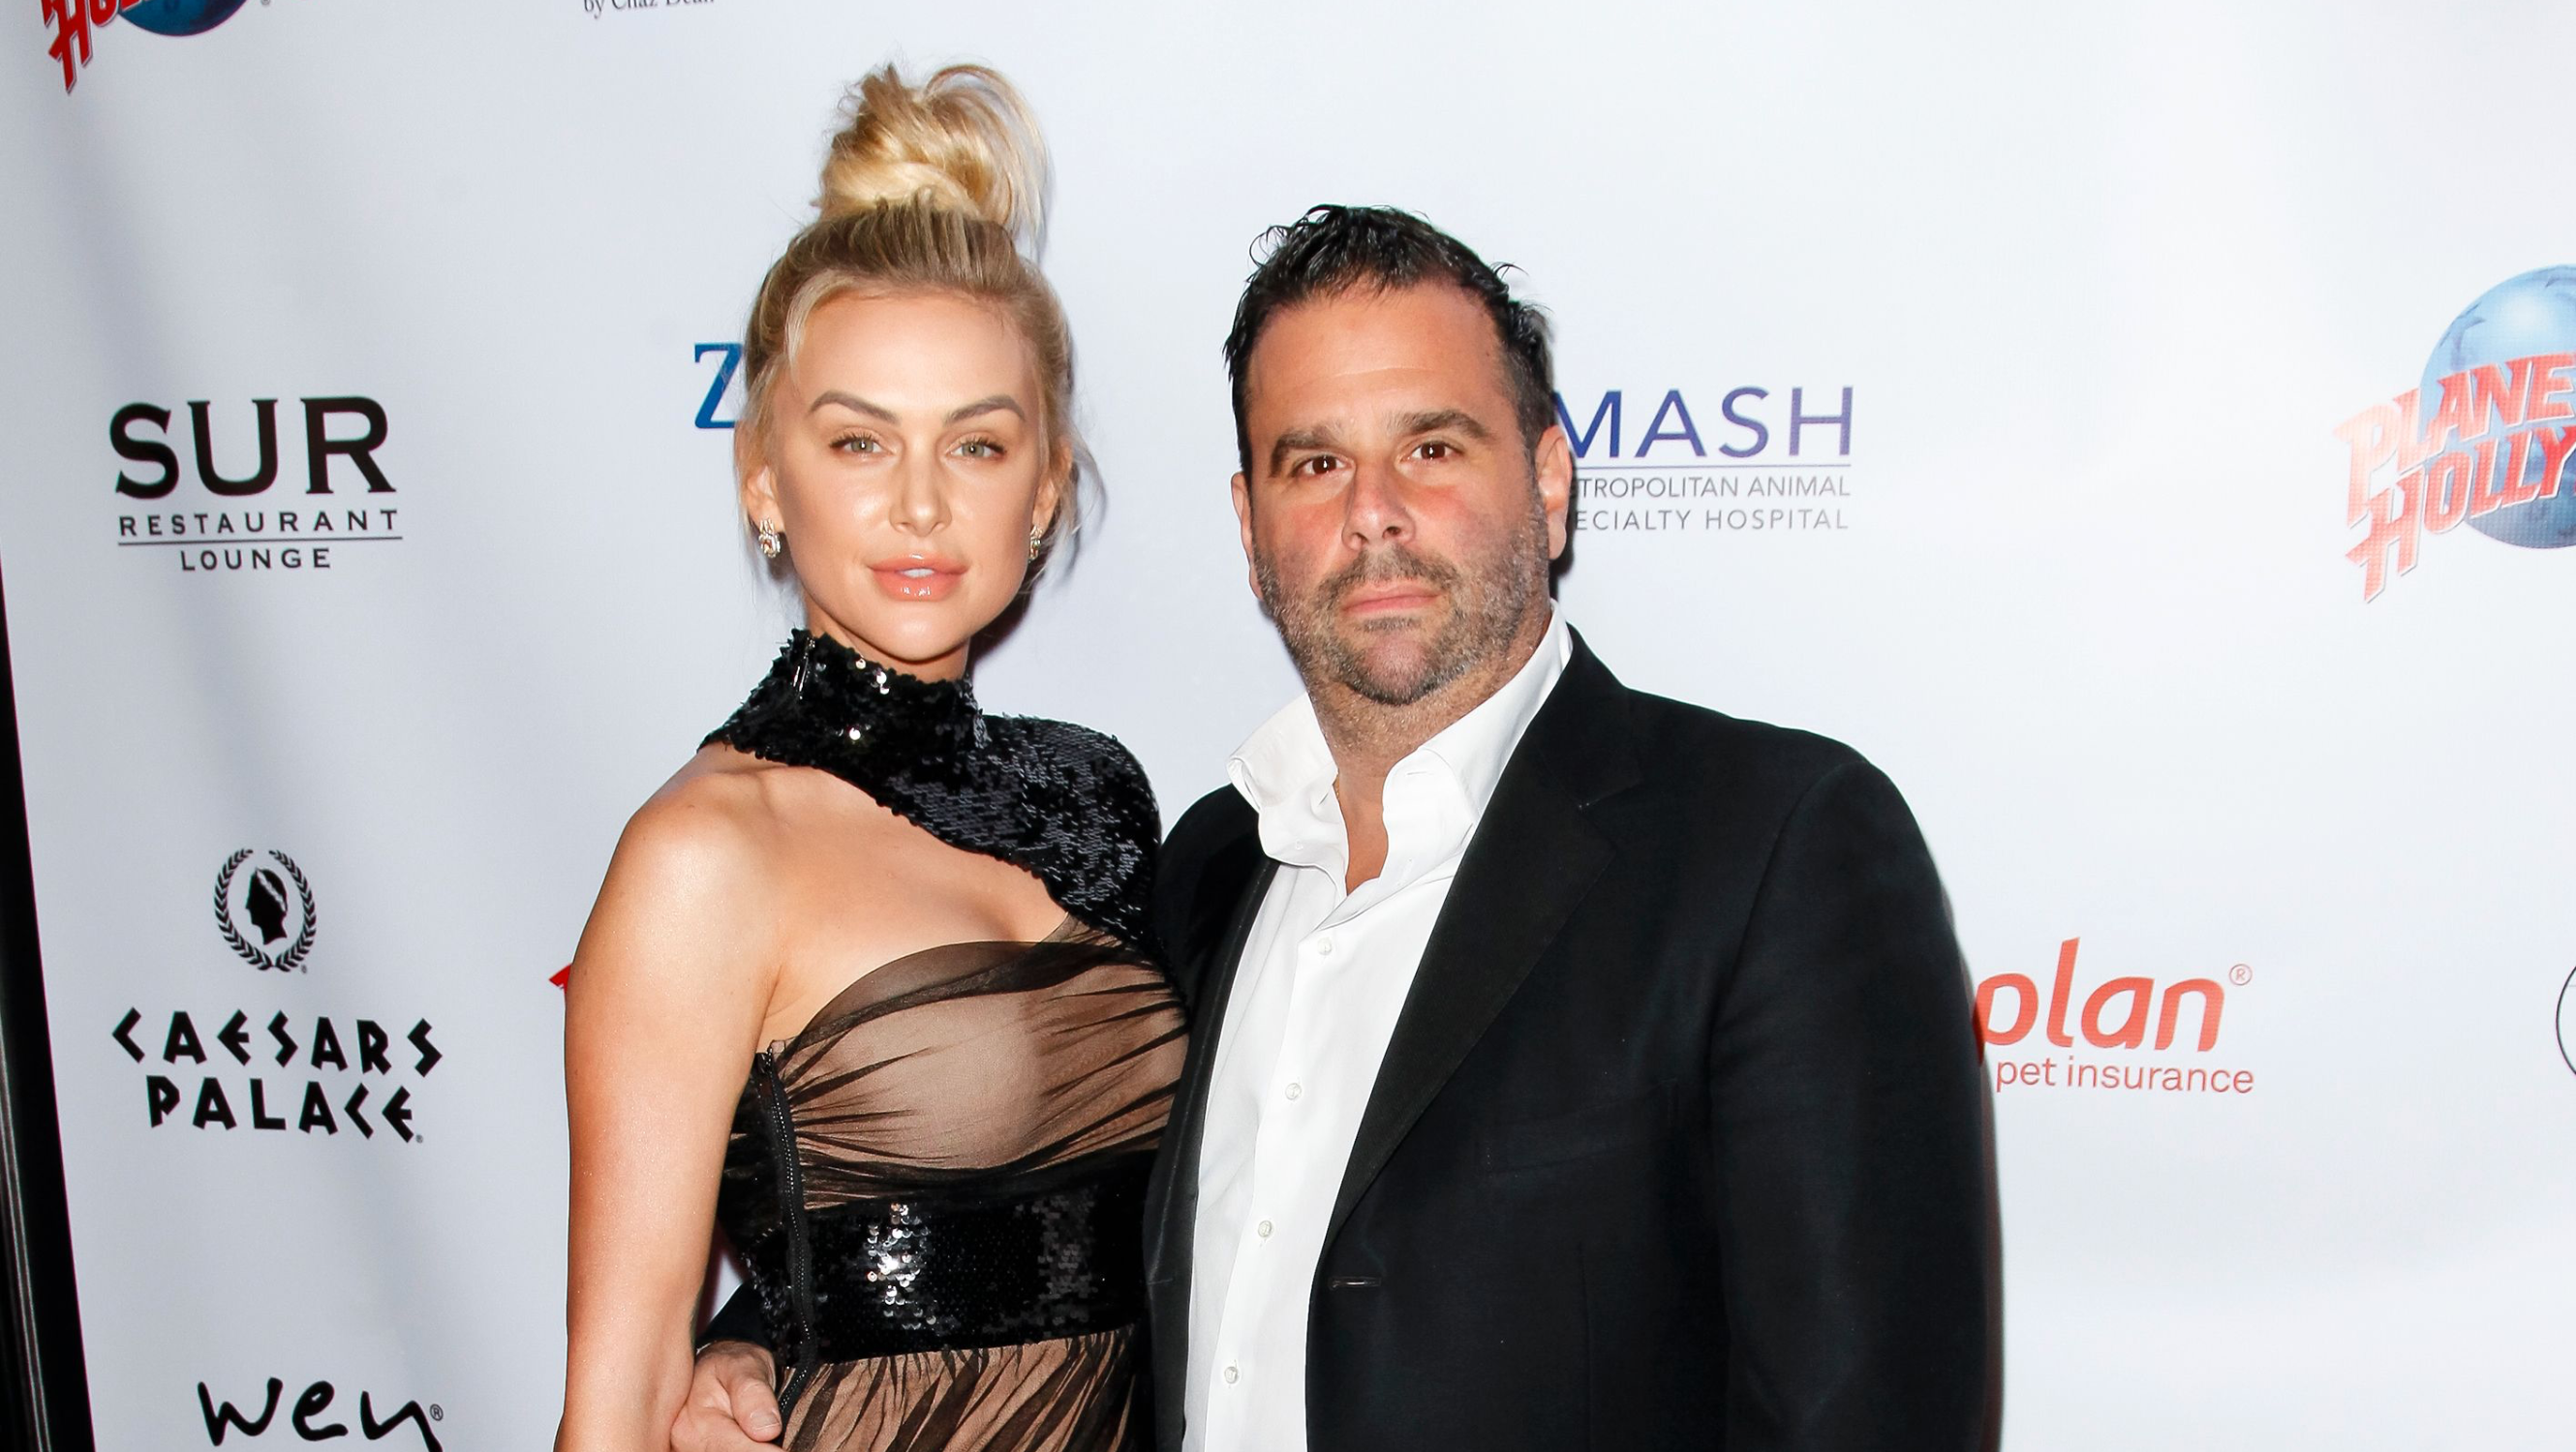 Lala Kent’s Fiancé Randall Emmett Dishes On His ‘Vanderpump Rules’ Co-Stars And His Experience On The Show